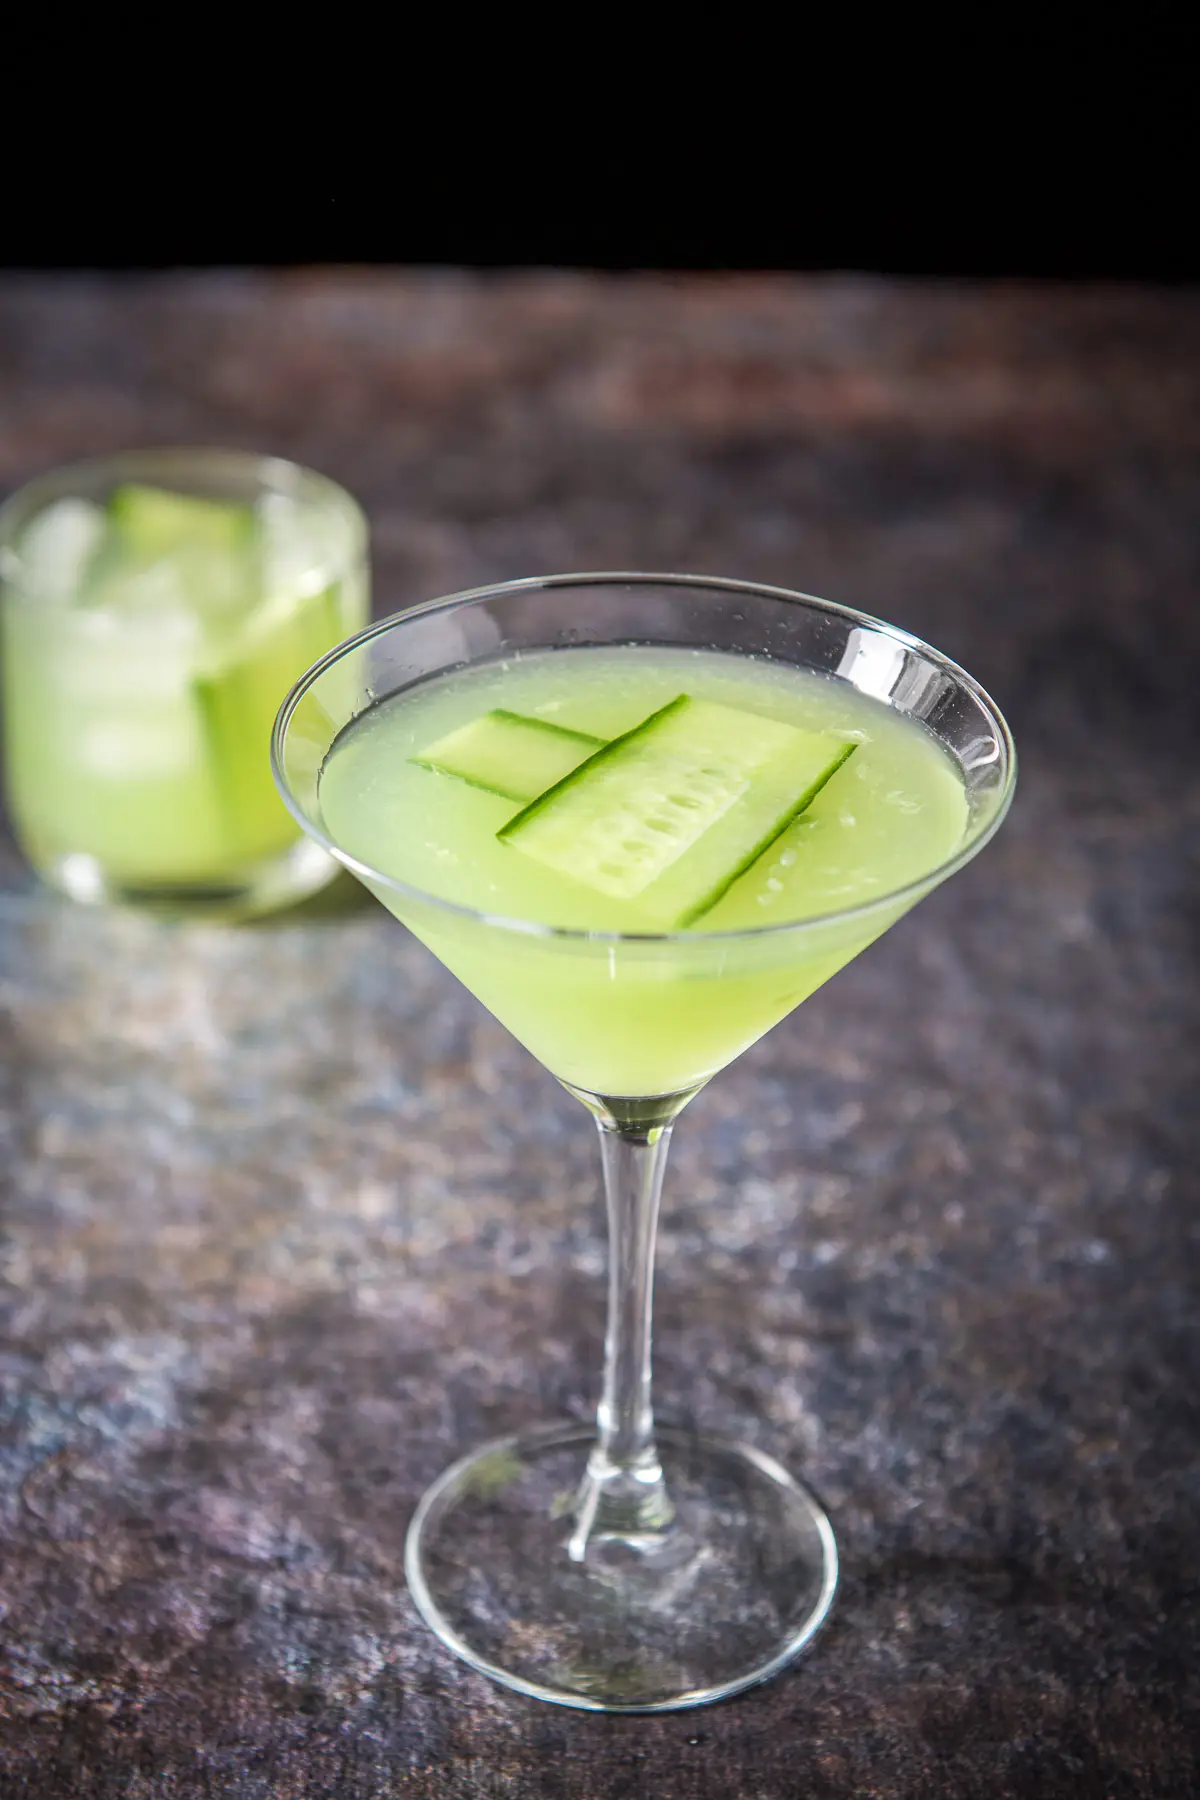 A classic martini glass filled with the cucumber cocktail with a double old fashioned glass in the back